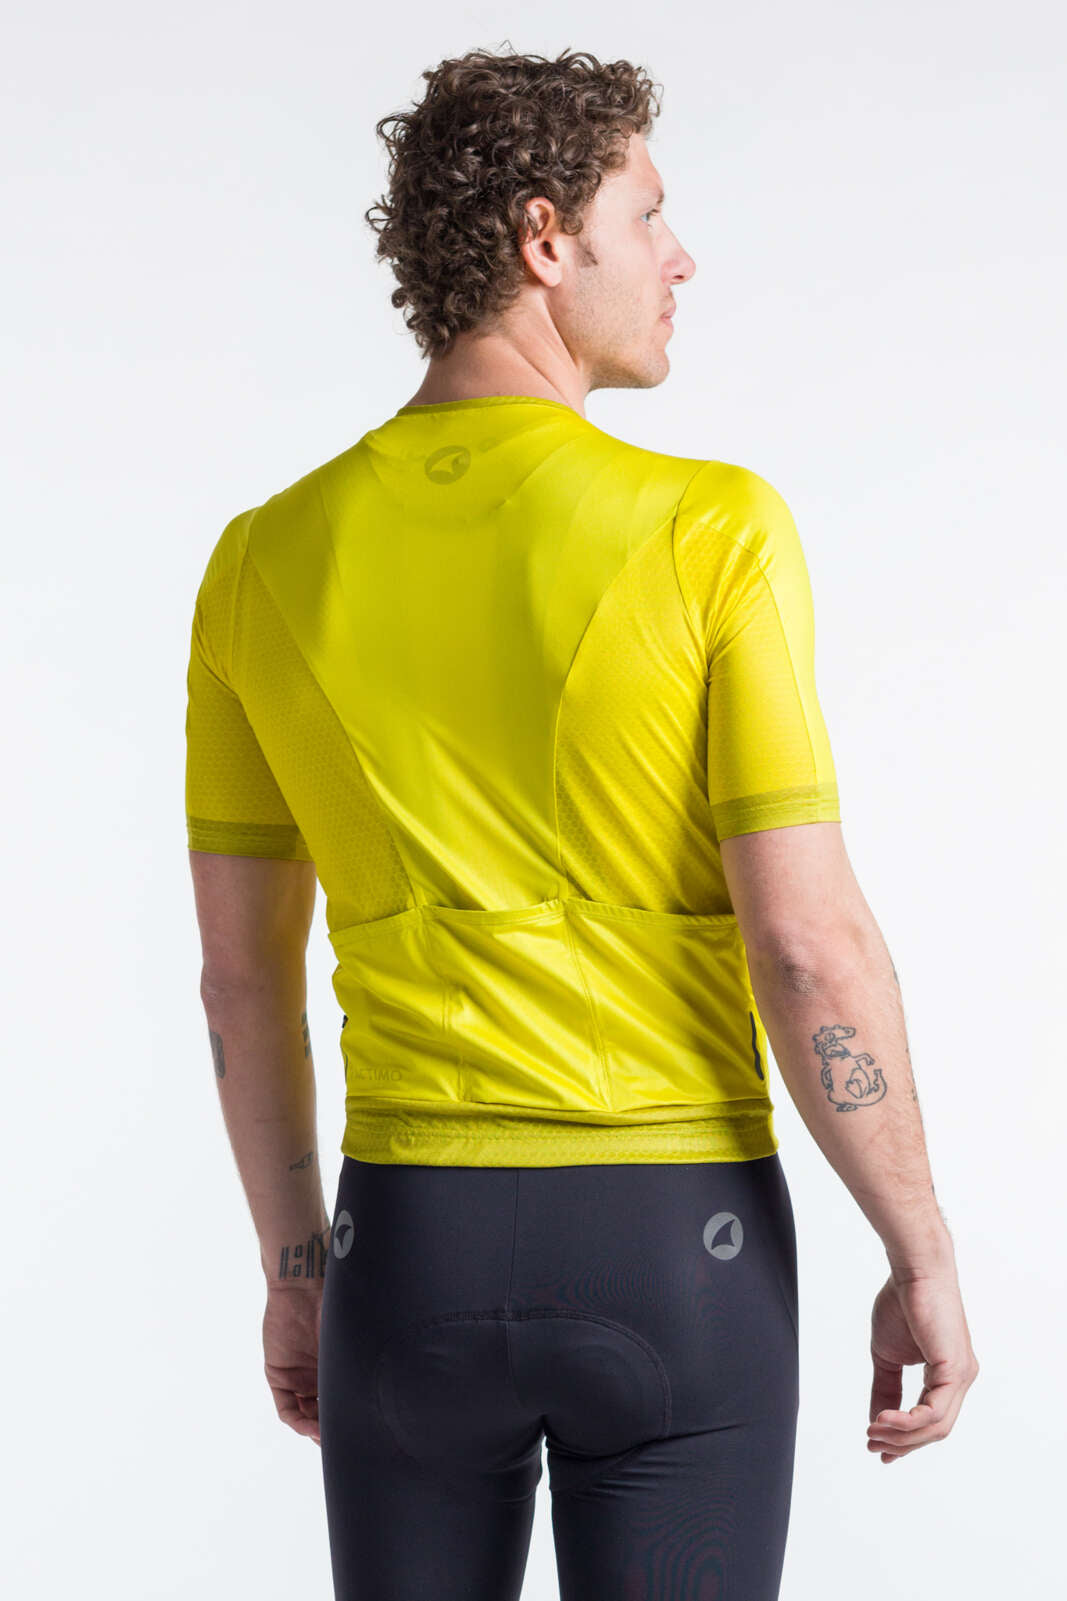 Men's Best Yellow Cycling Jersey - Summit Back View